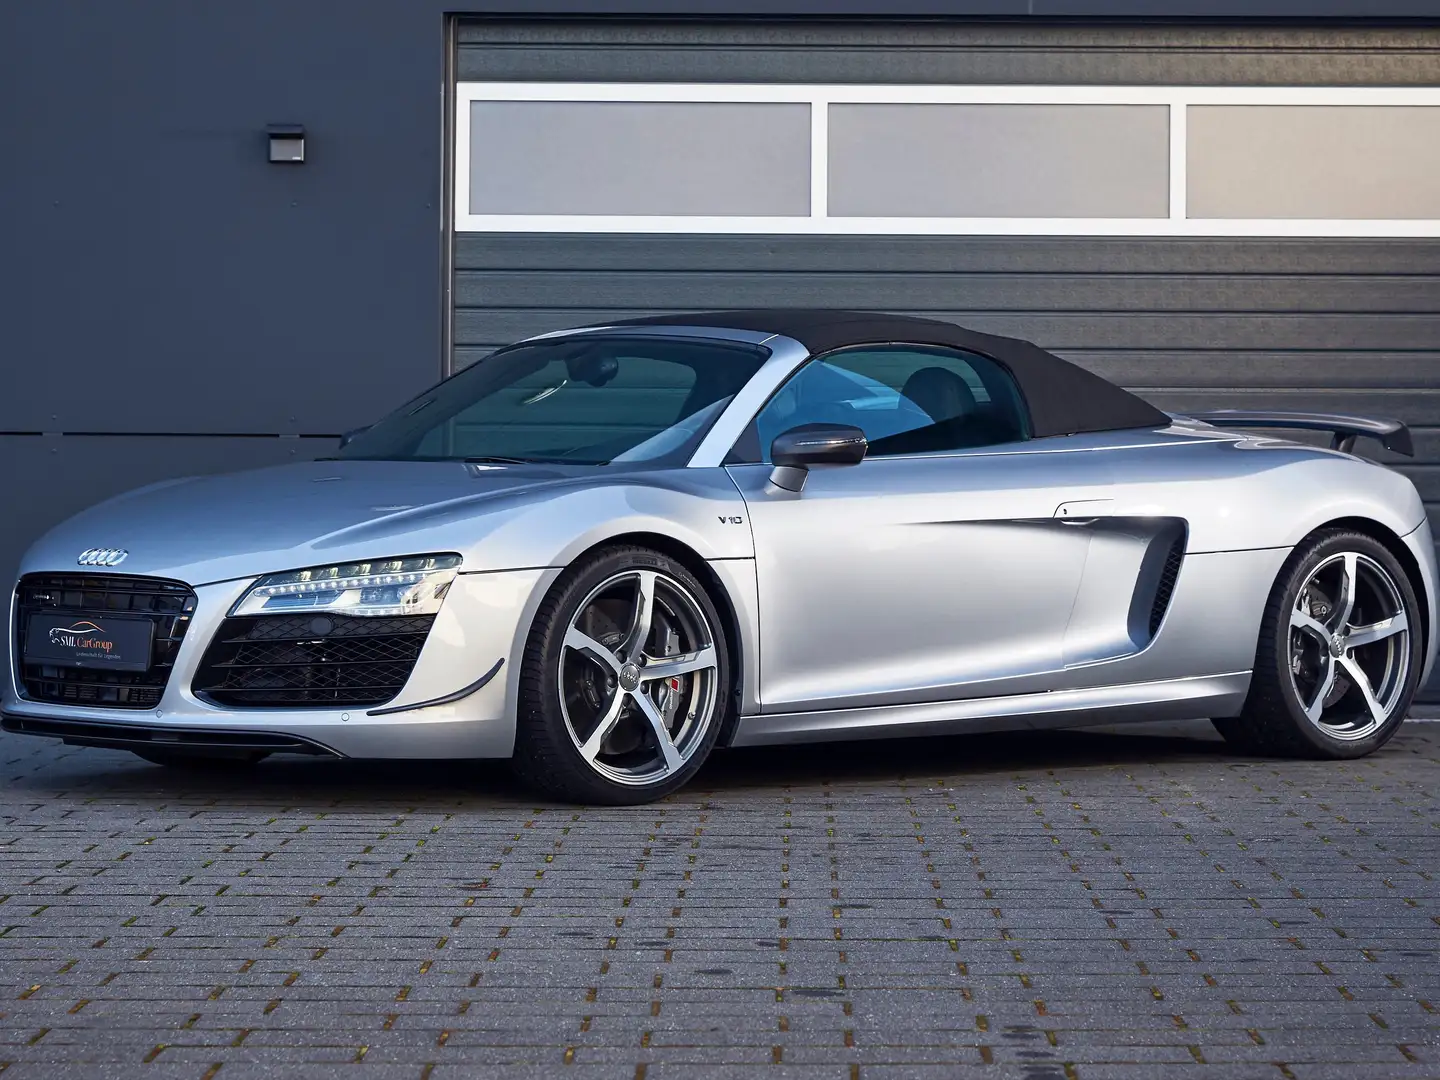 Audi R8 5.2 Spyder - Limited LeMans Edition - No. 01 of 30 Silber - 1